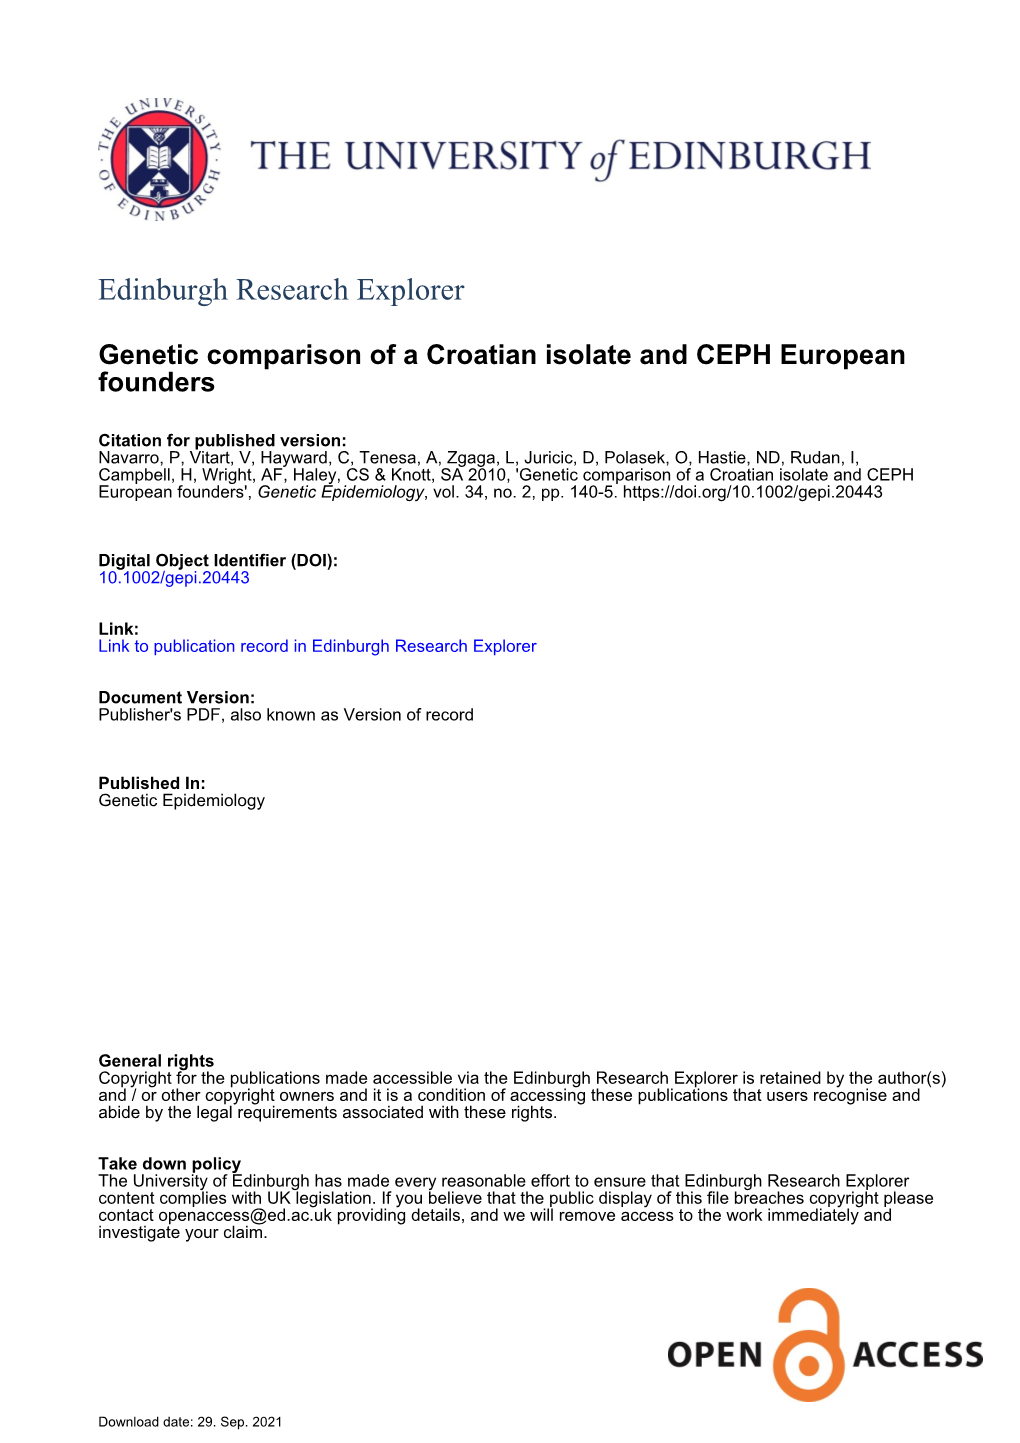 Genetic Comparison of a Croatian Isolate and CEPH European Founders